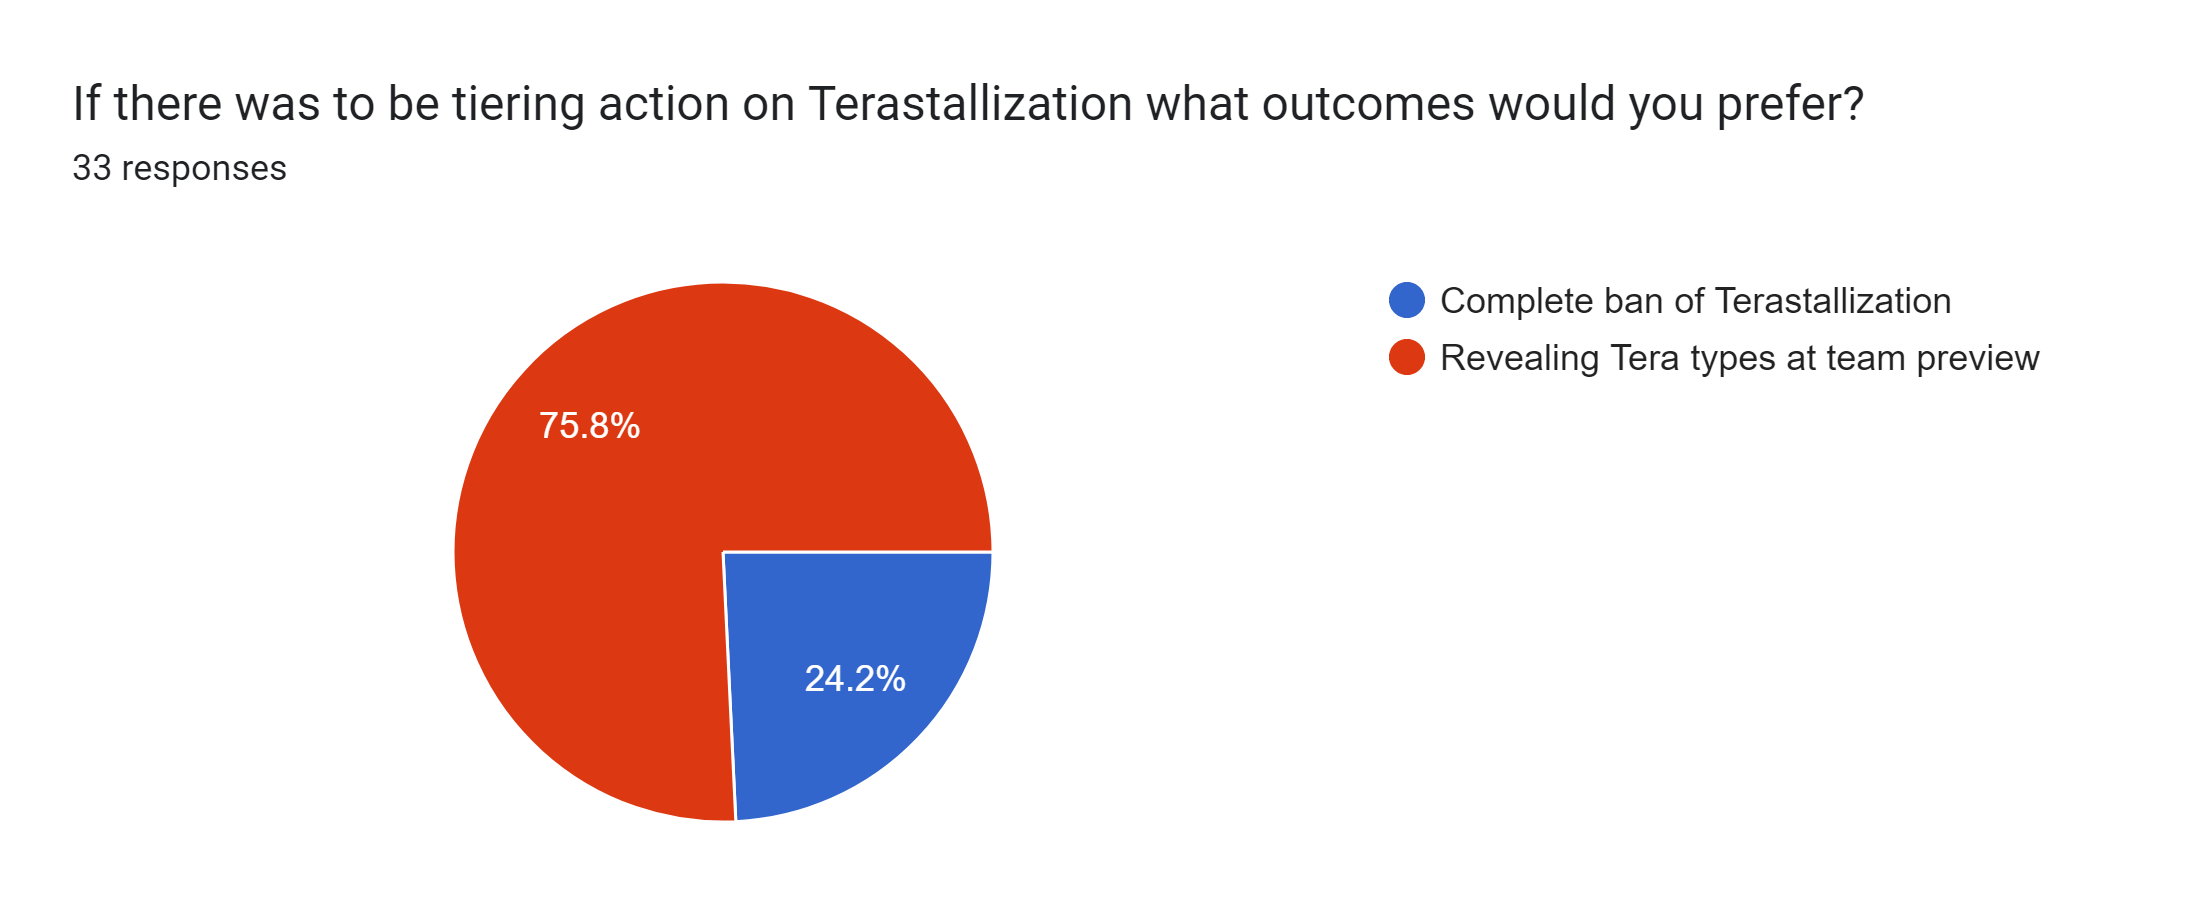 Forms response chart. Question title: If there was to be tiering action on Terastallization what outcomes would you prefer?. Number of responses: 33 responses.